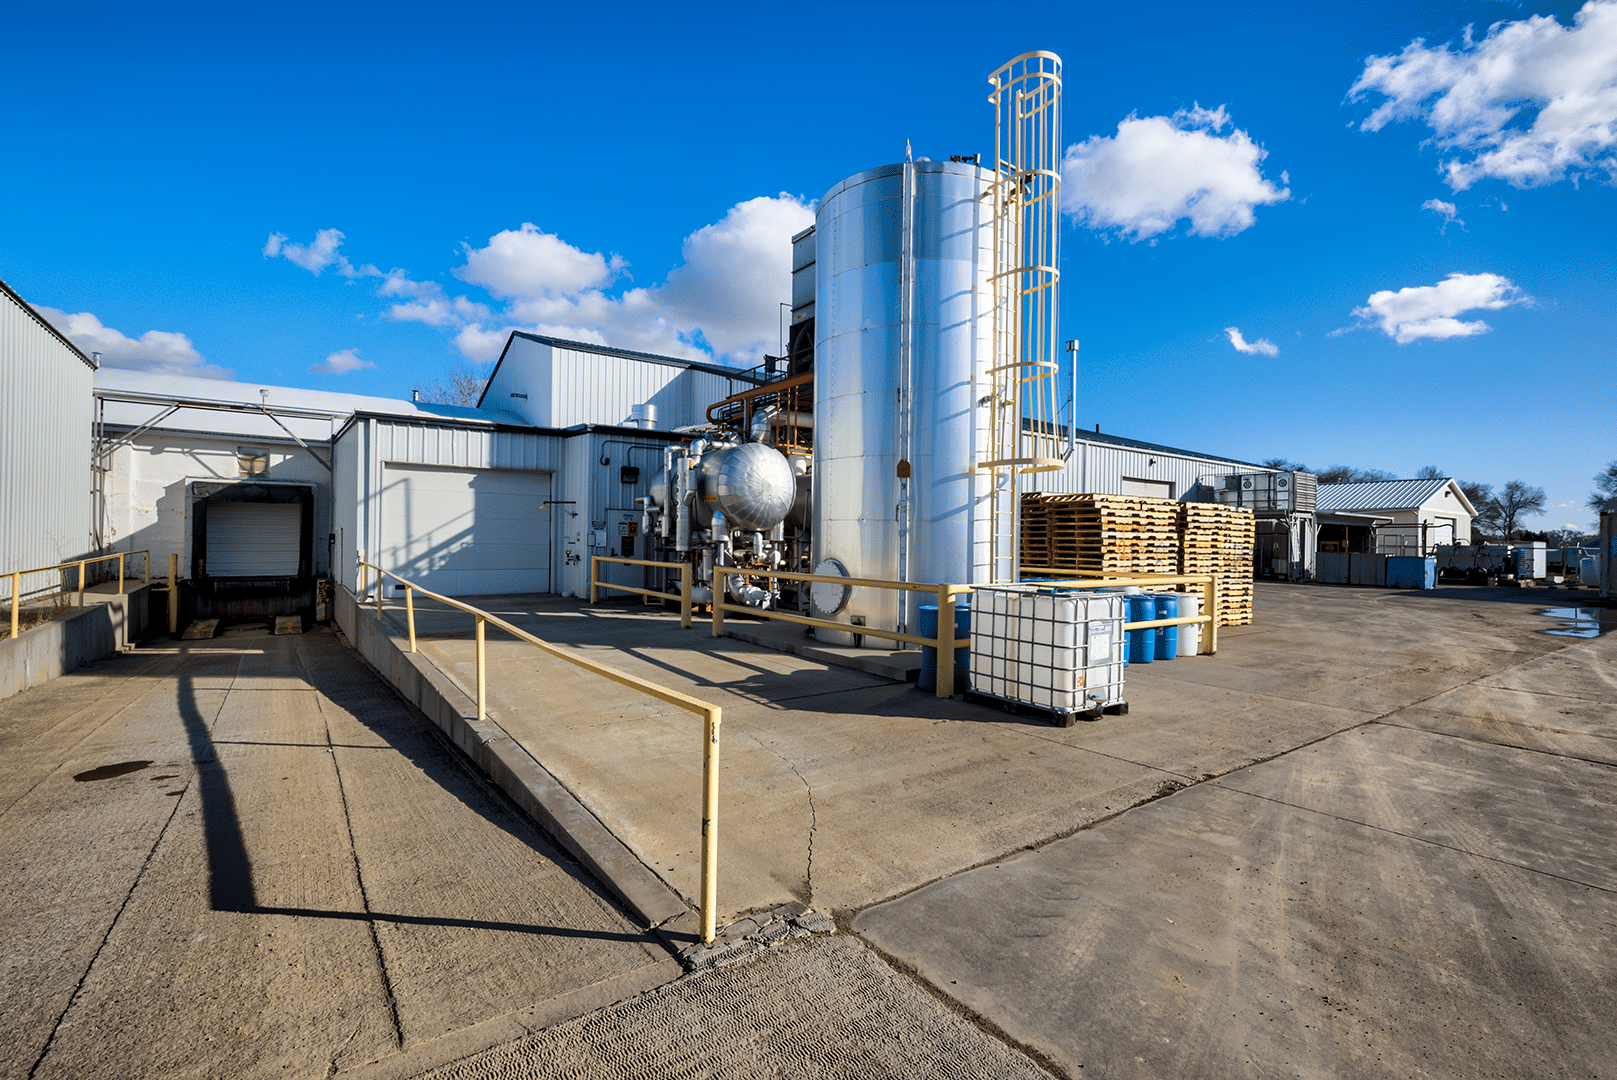 Idaho Natural and Organic Foods is a Leaseback Industrial office and warehouse building east of Boise in Mountain Home, Idaho